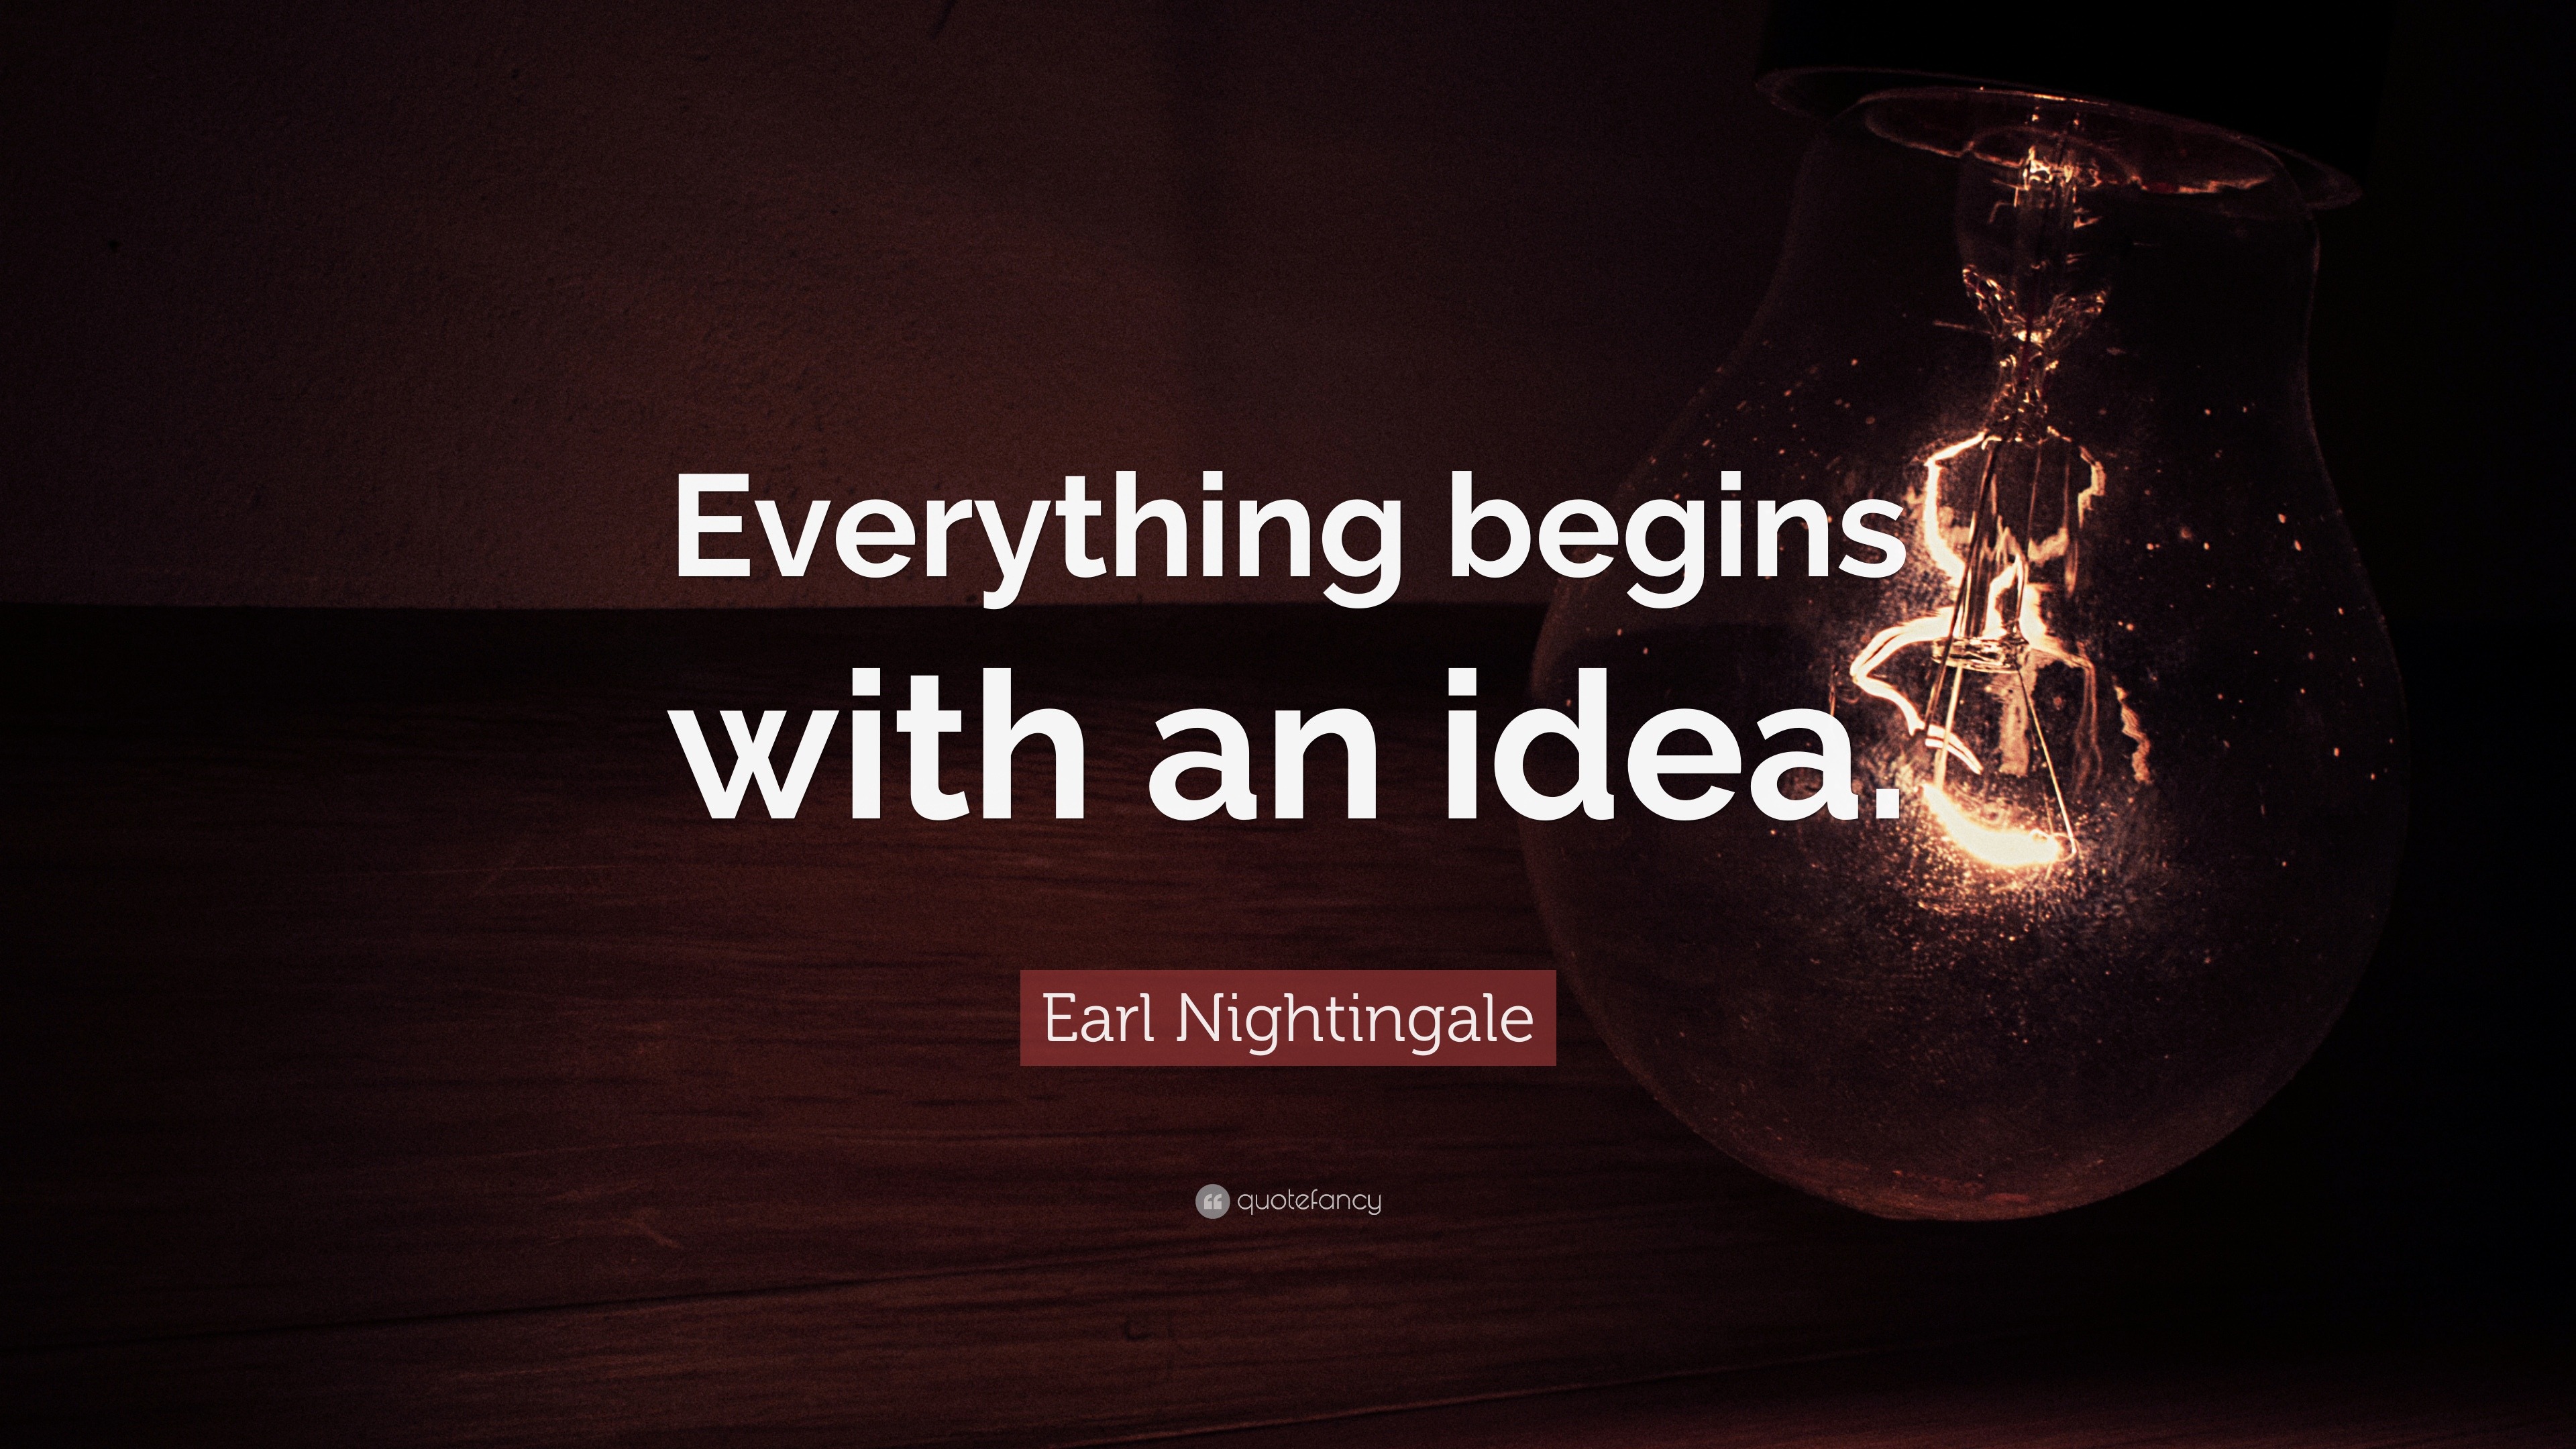 Top 12 Quotes About Ideas 12 Update   Quotefancy